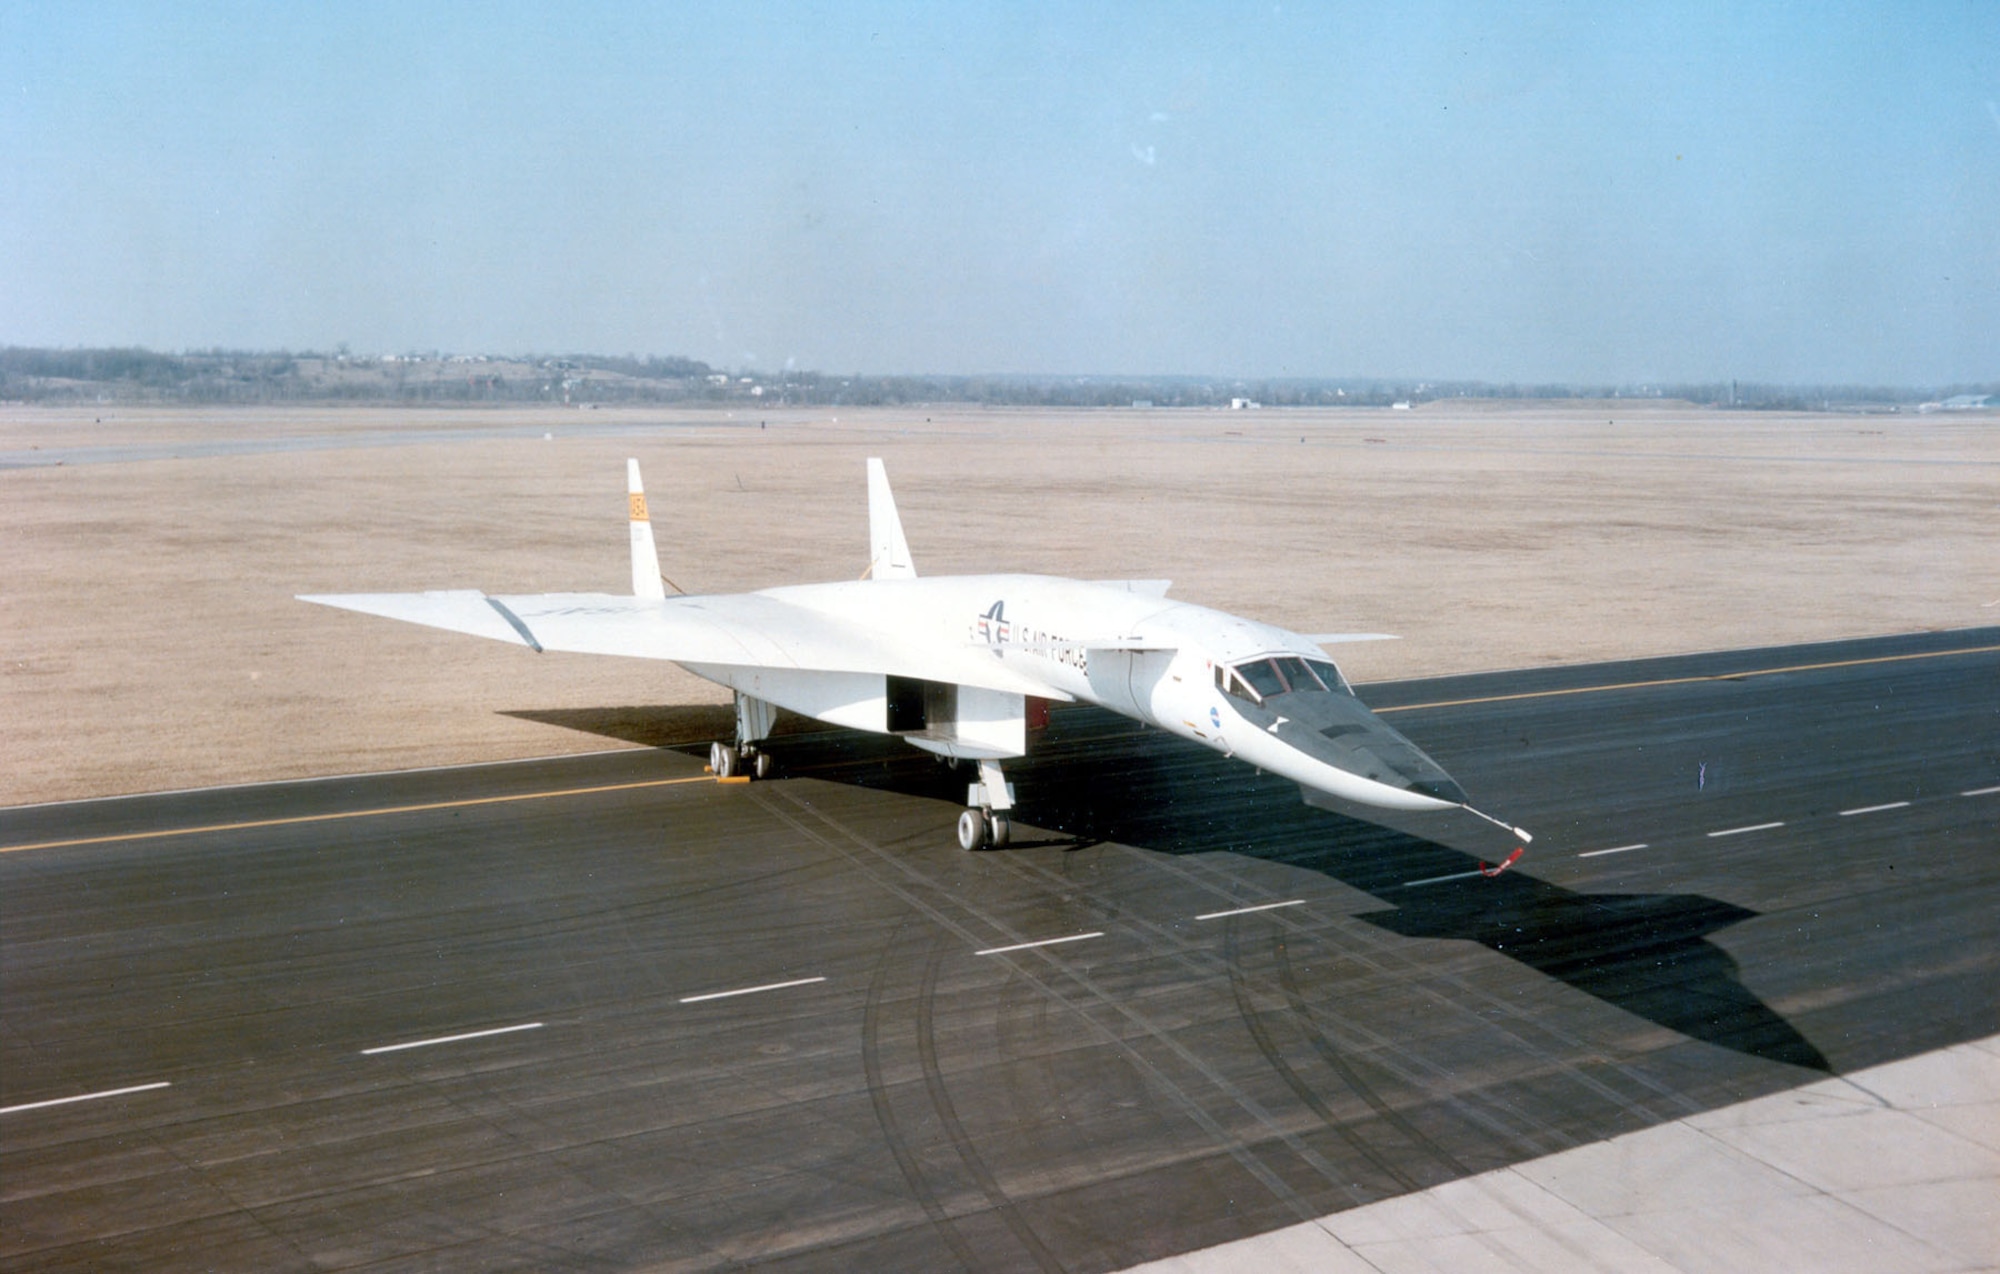 DAYTON, Ohio -- North American XB-70 Valkyrie at the National Museum of the United States Air Force. (U.S. Air Force photo)